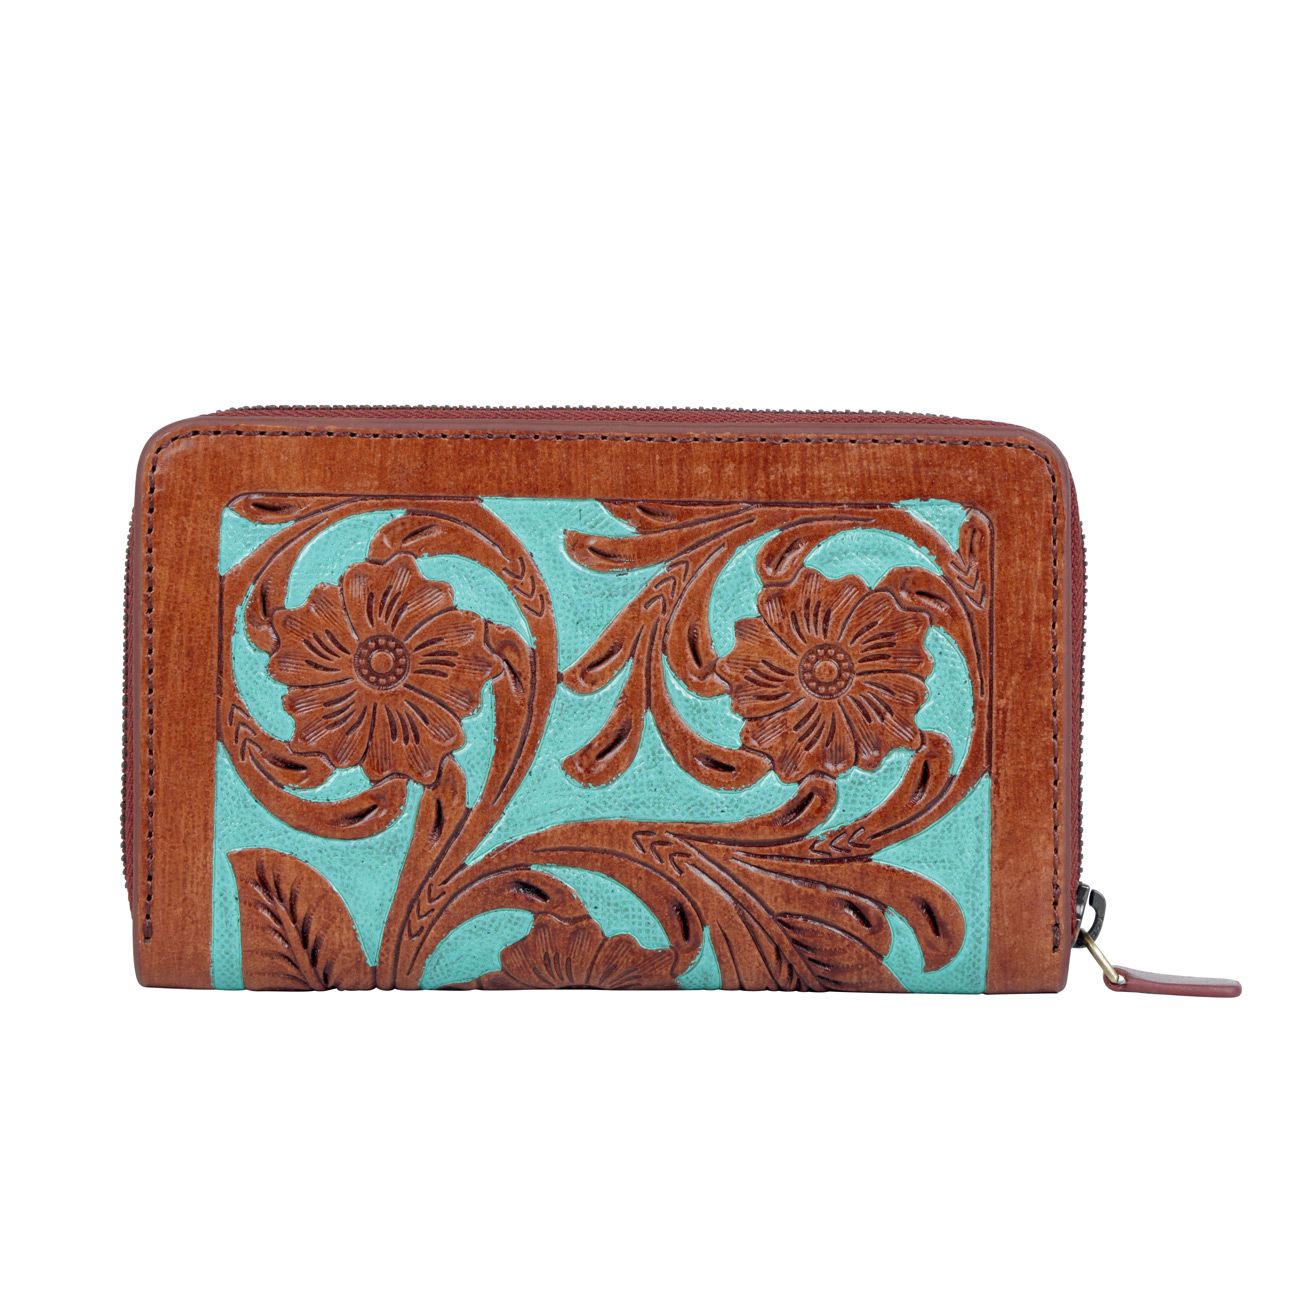 No Better Seascape Turquoise Tooled Leather Wallet